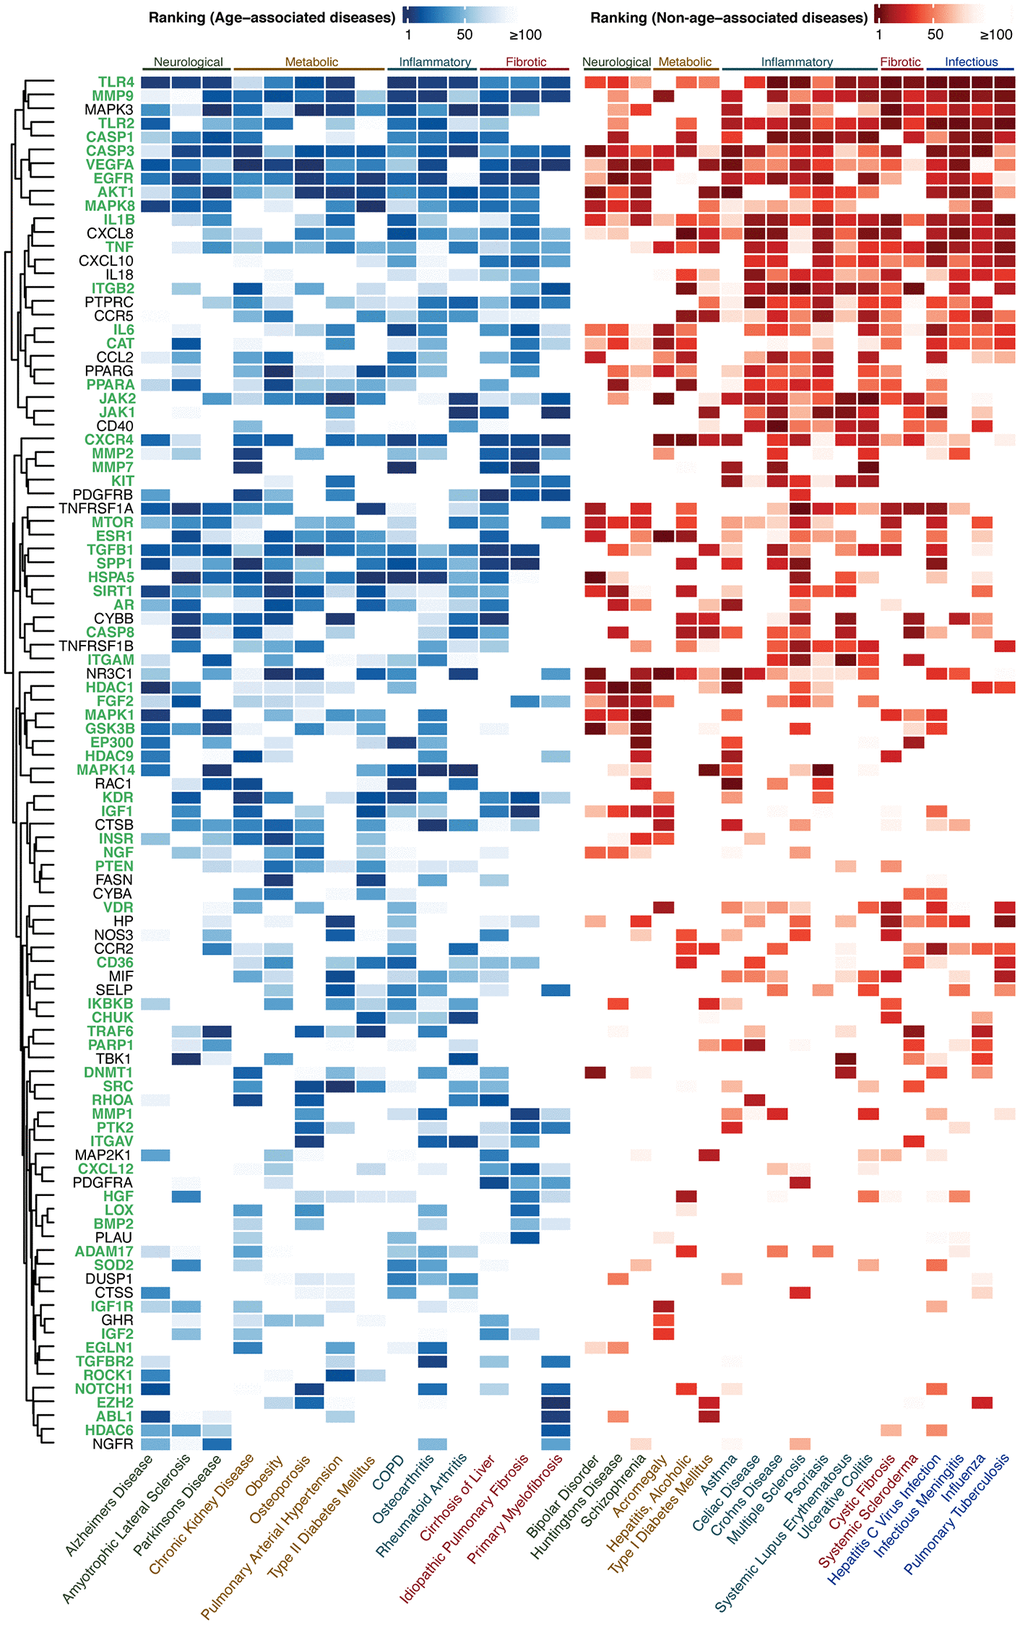 Ranking of the top-100 gene set for AADs under high confidence settings. The ranking of the targets in AADs and NAADs are colored in blue-white and red-white thermal scales respectively. High color intensity stands for high ranking. The lowest ranking was capped at 100. Targets associated with the hallmark(s) of aging are labeled in green. Abbreviation: COPD: Chronic obstructive pulmonary disease.